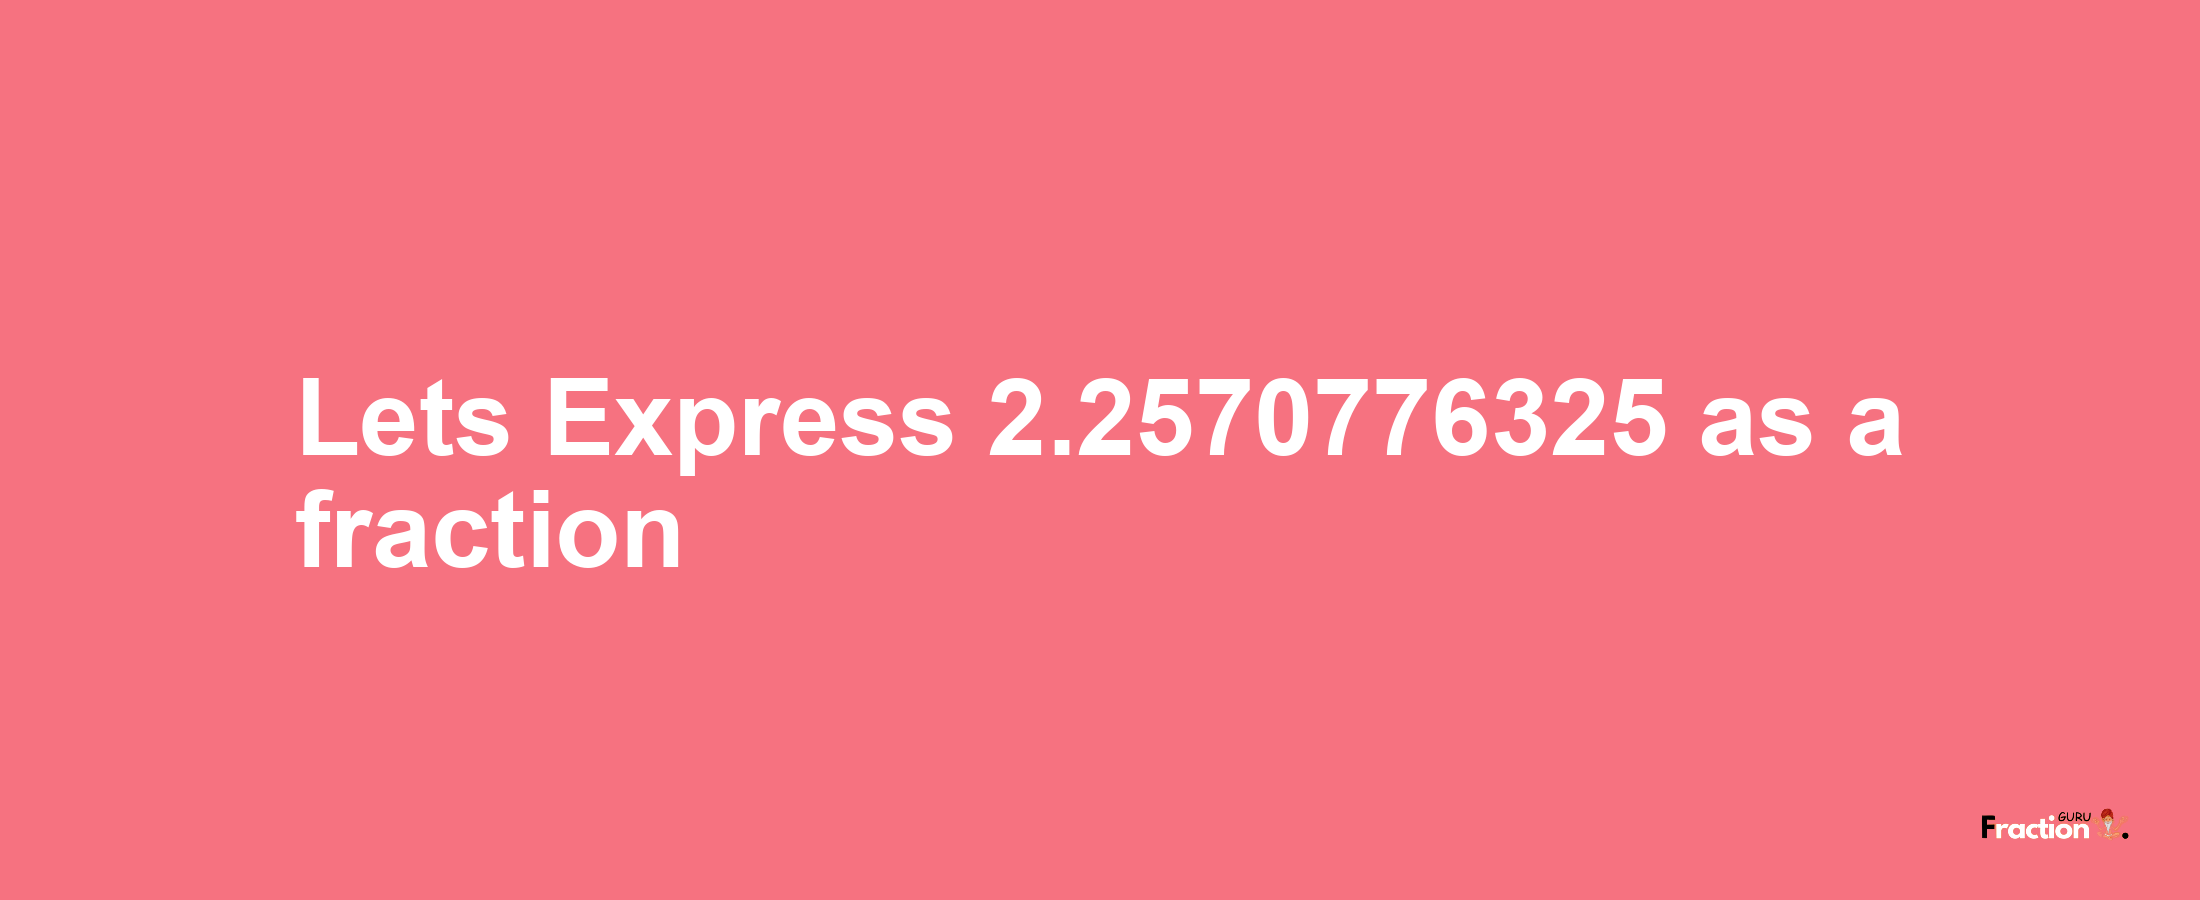 Lets Express 2.2570776325 as afraction